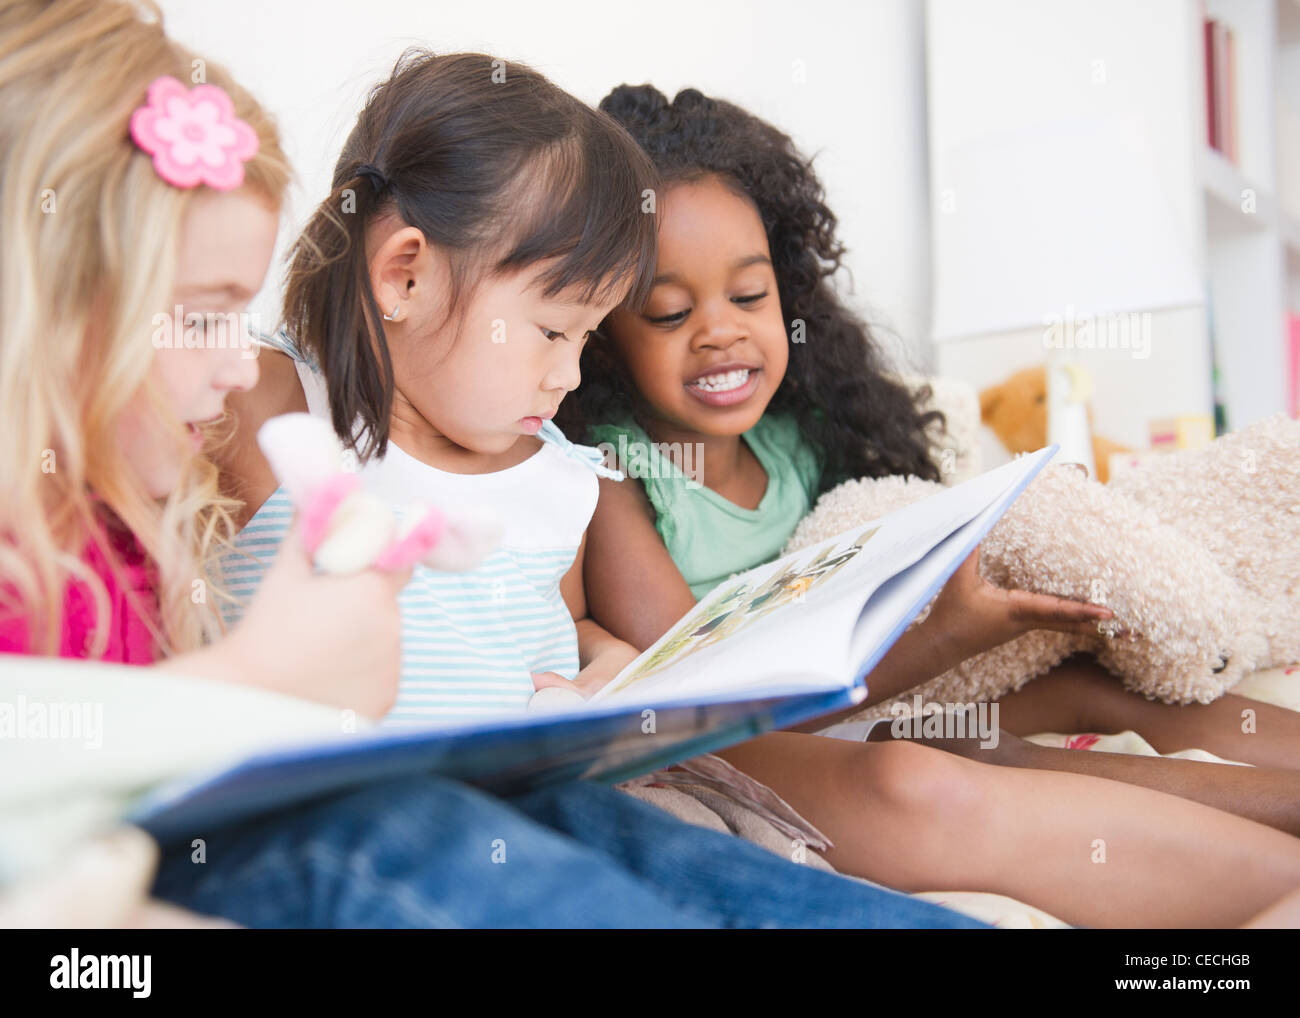 Girls reading book together Stock Photo